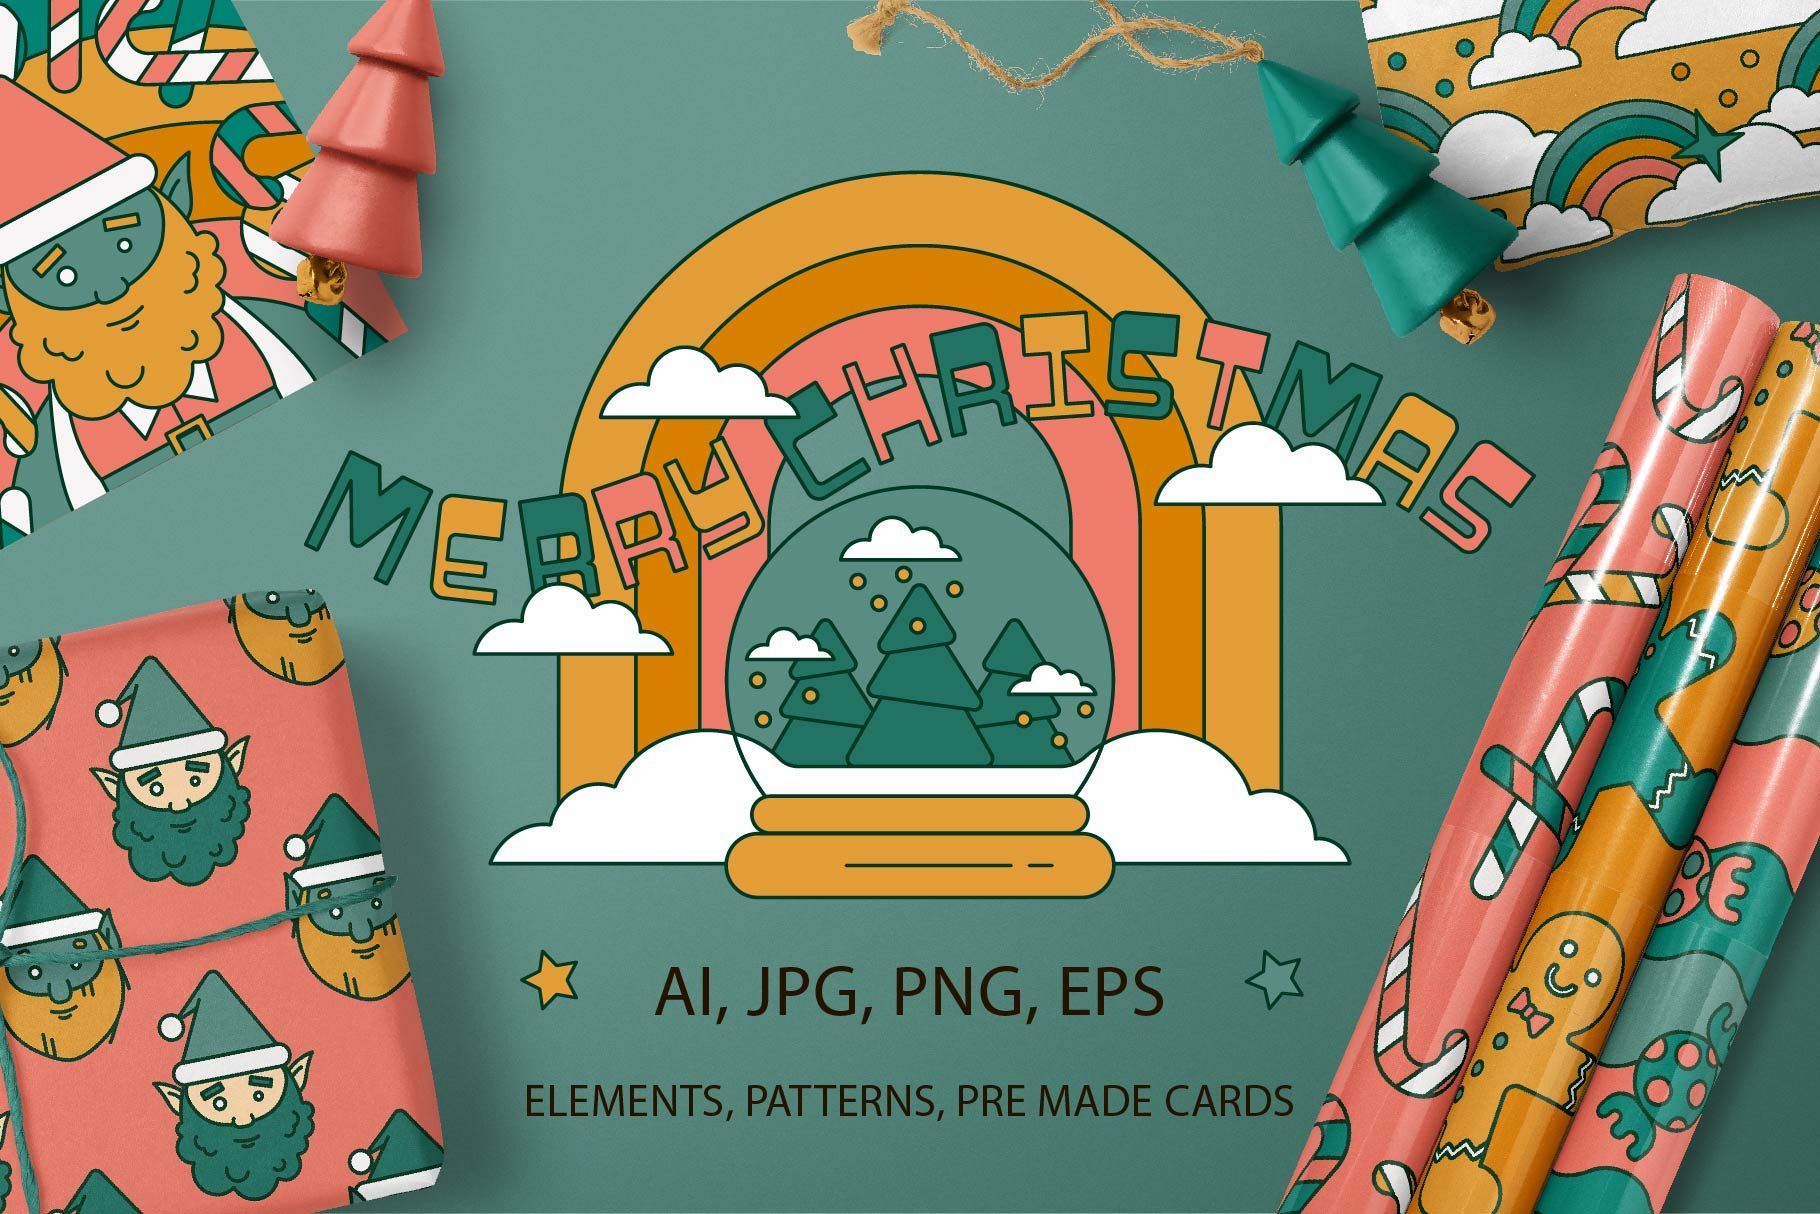 Christmas cards, patterns and elements